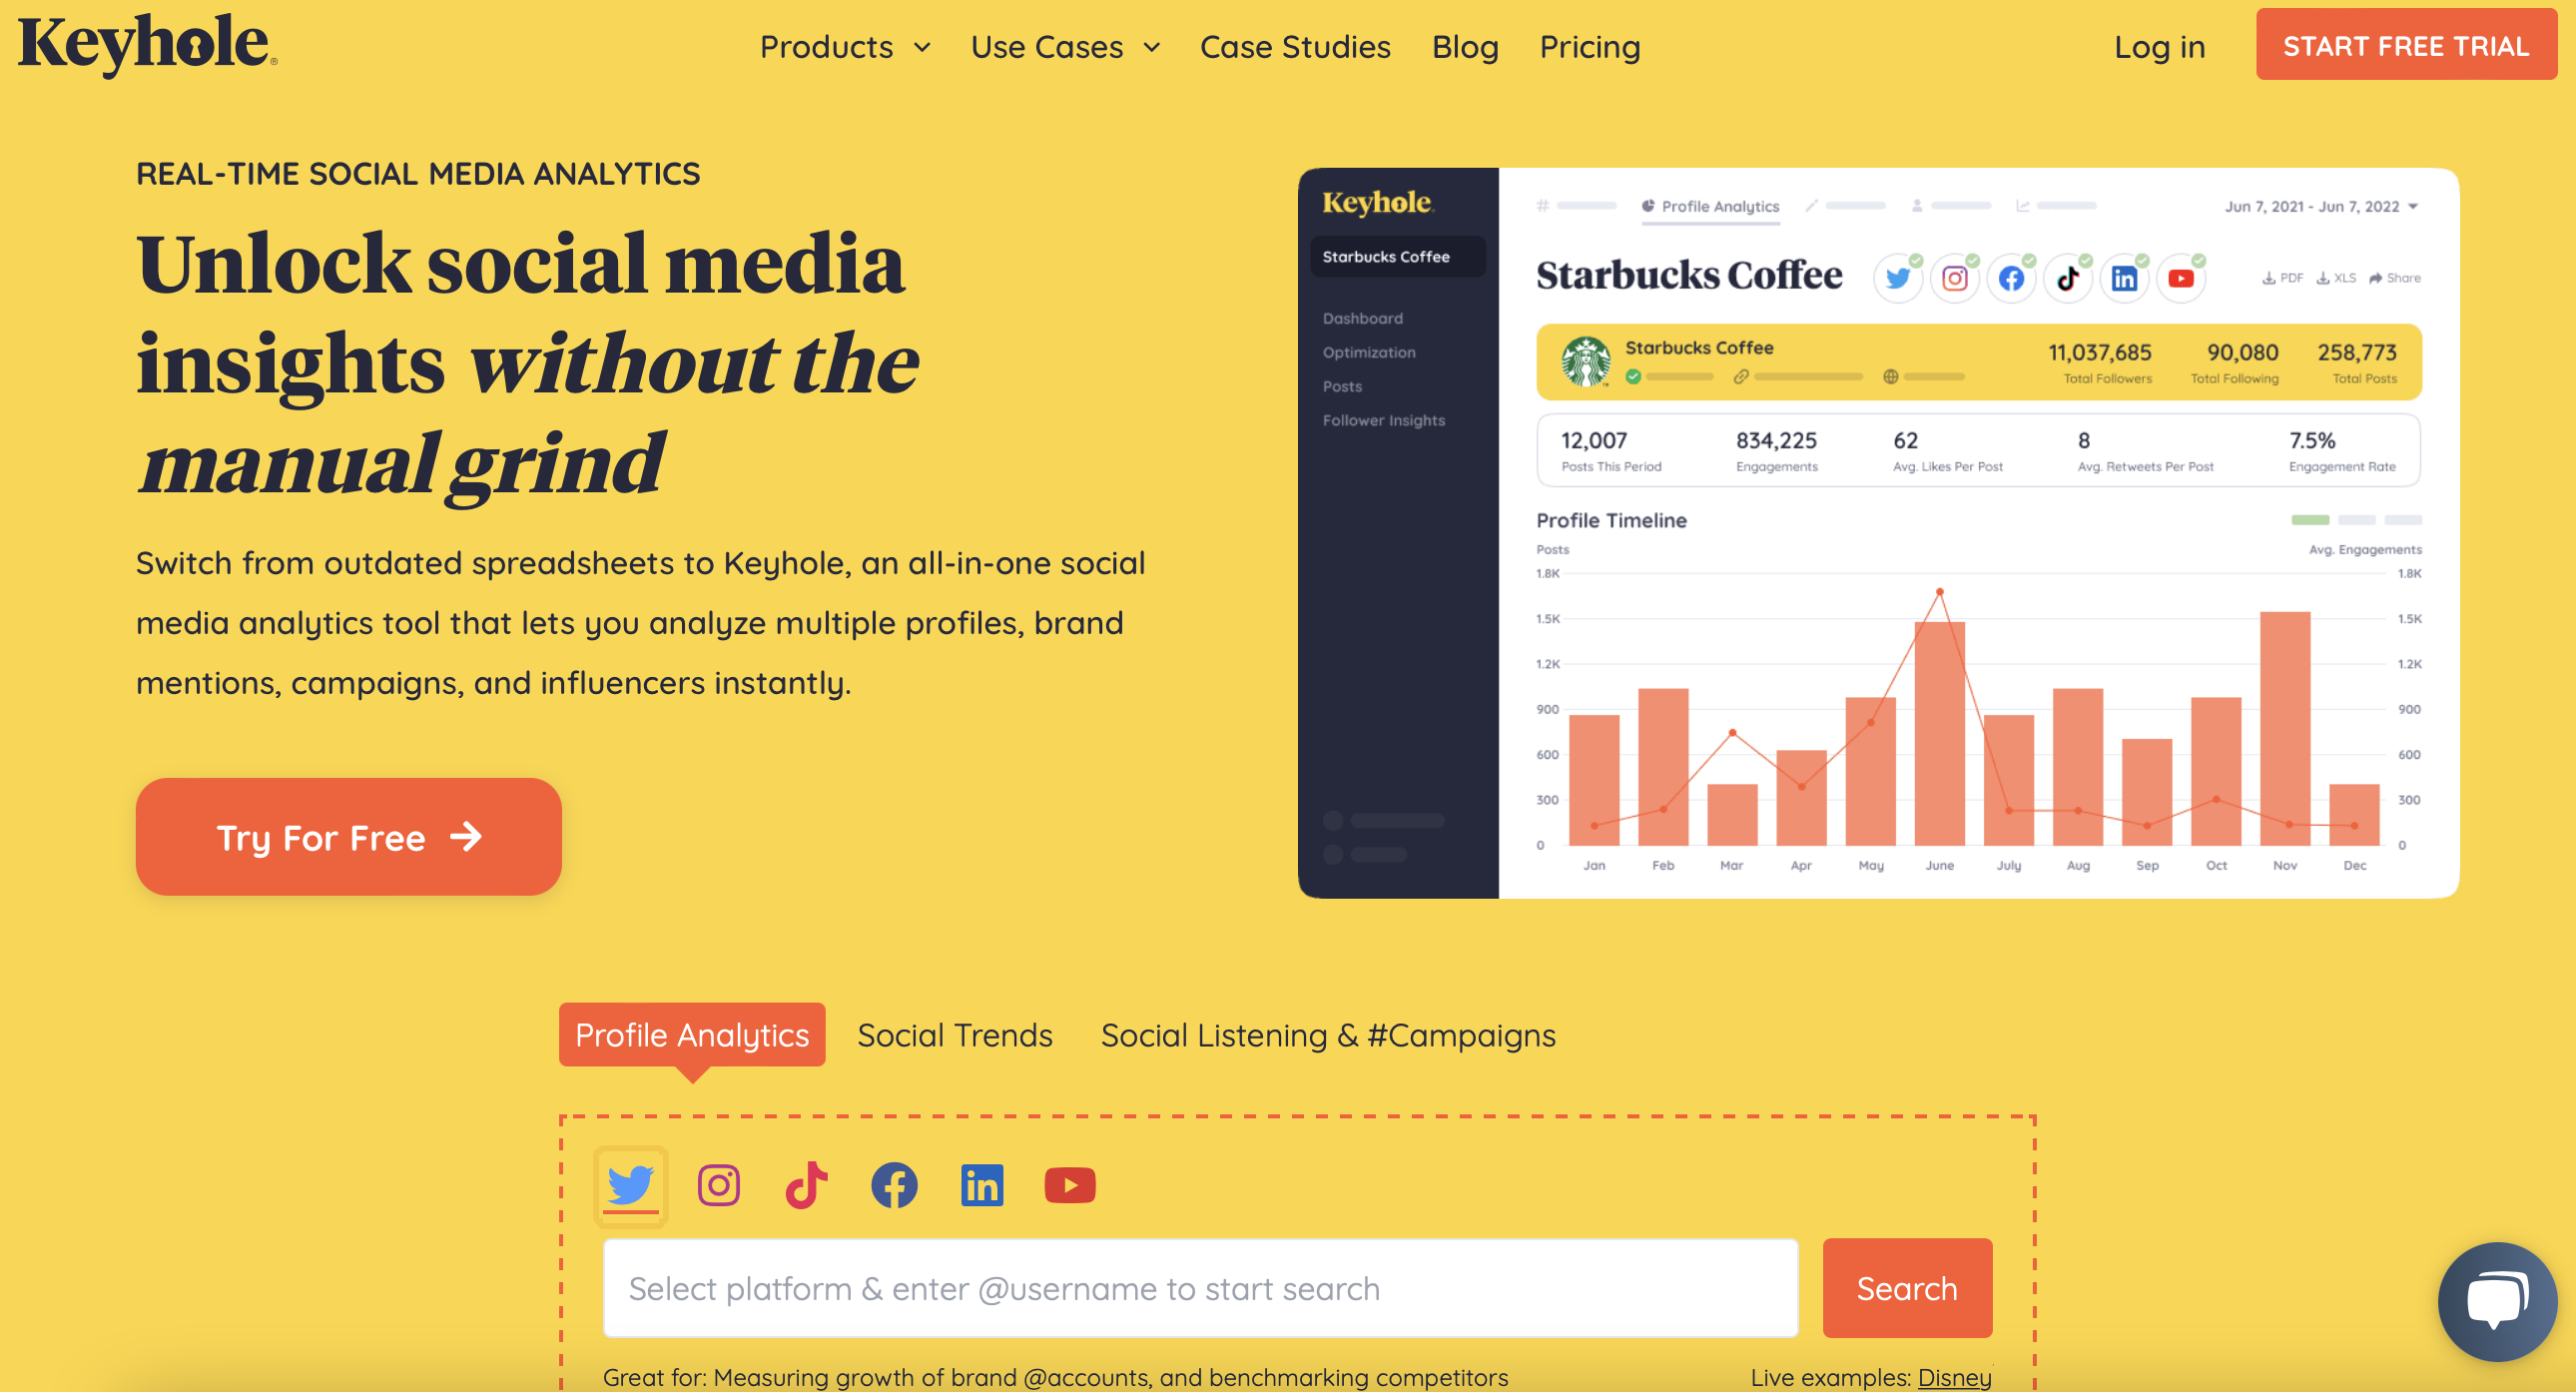 keyhole homepage showing a preview of a profile analytics for starbucks coffee and text that reads "unlock social media insights without the manual grind"